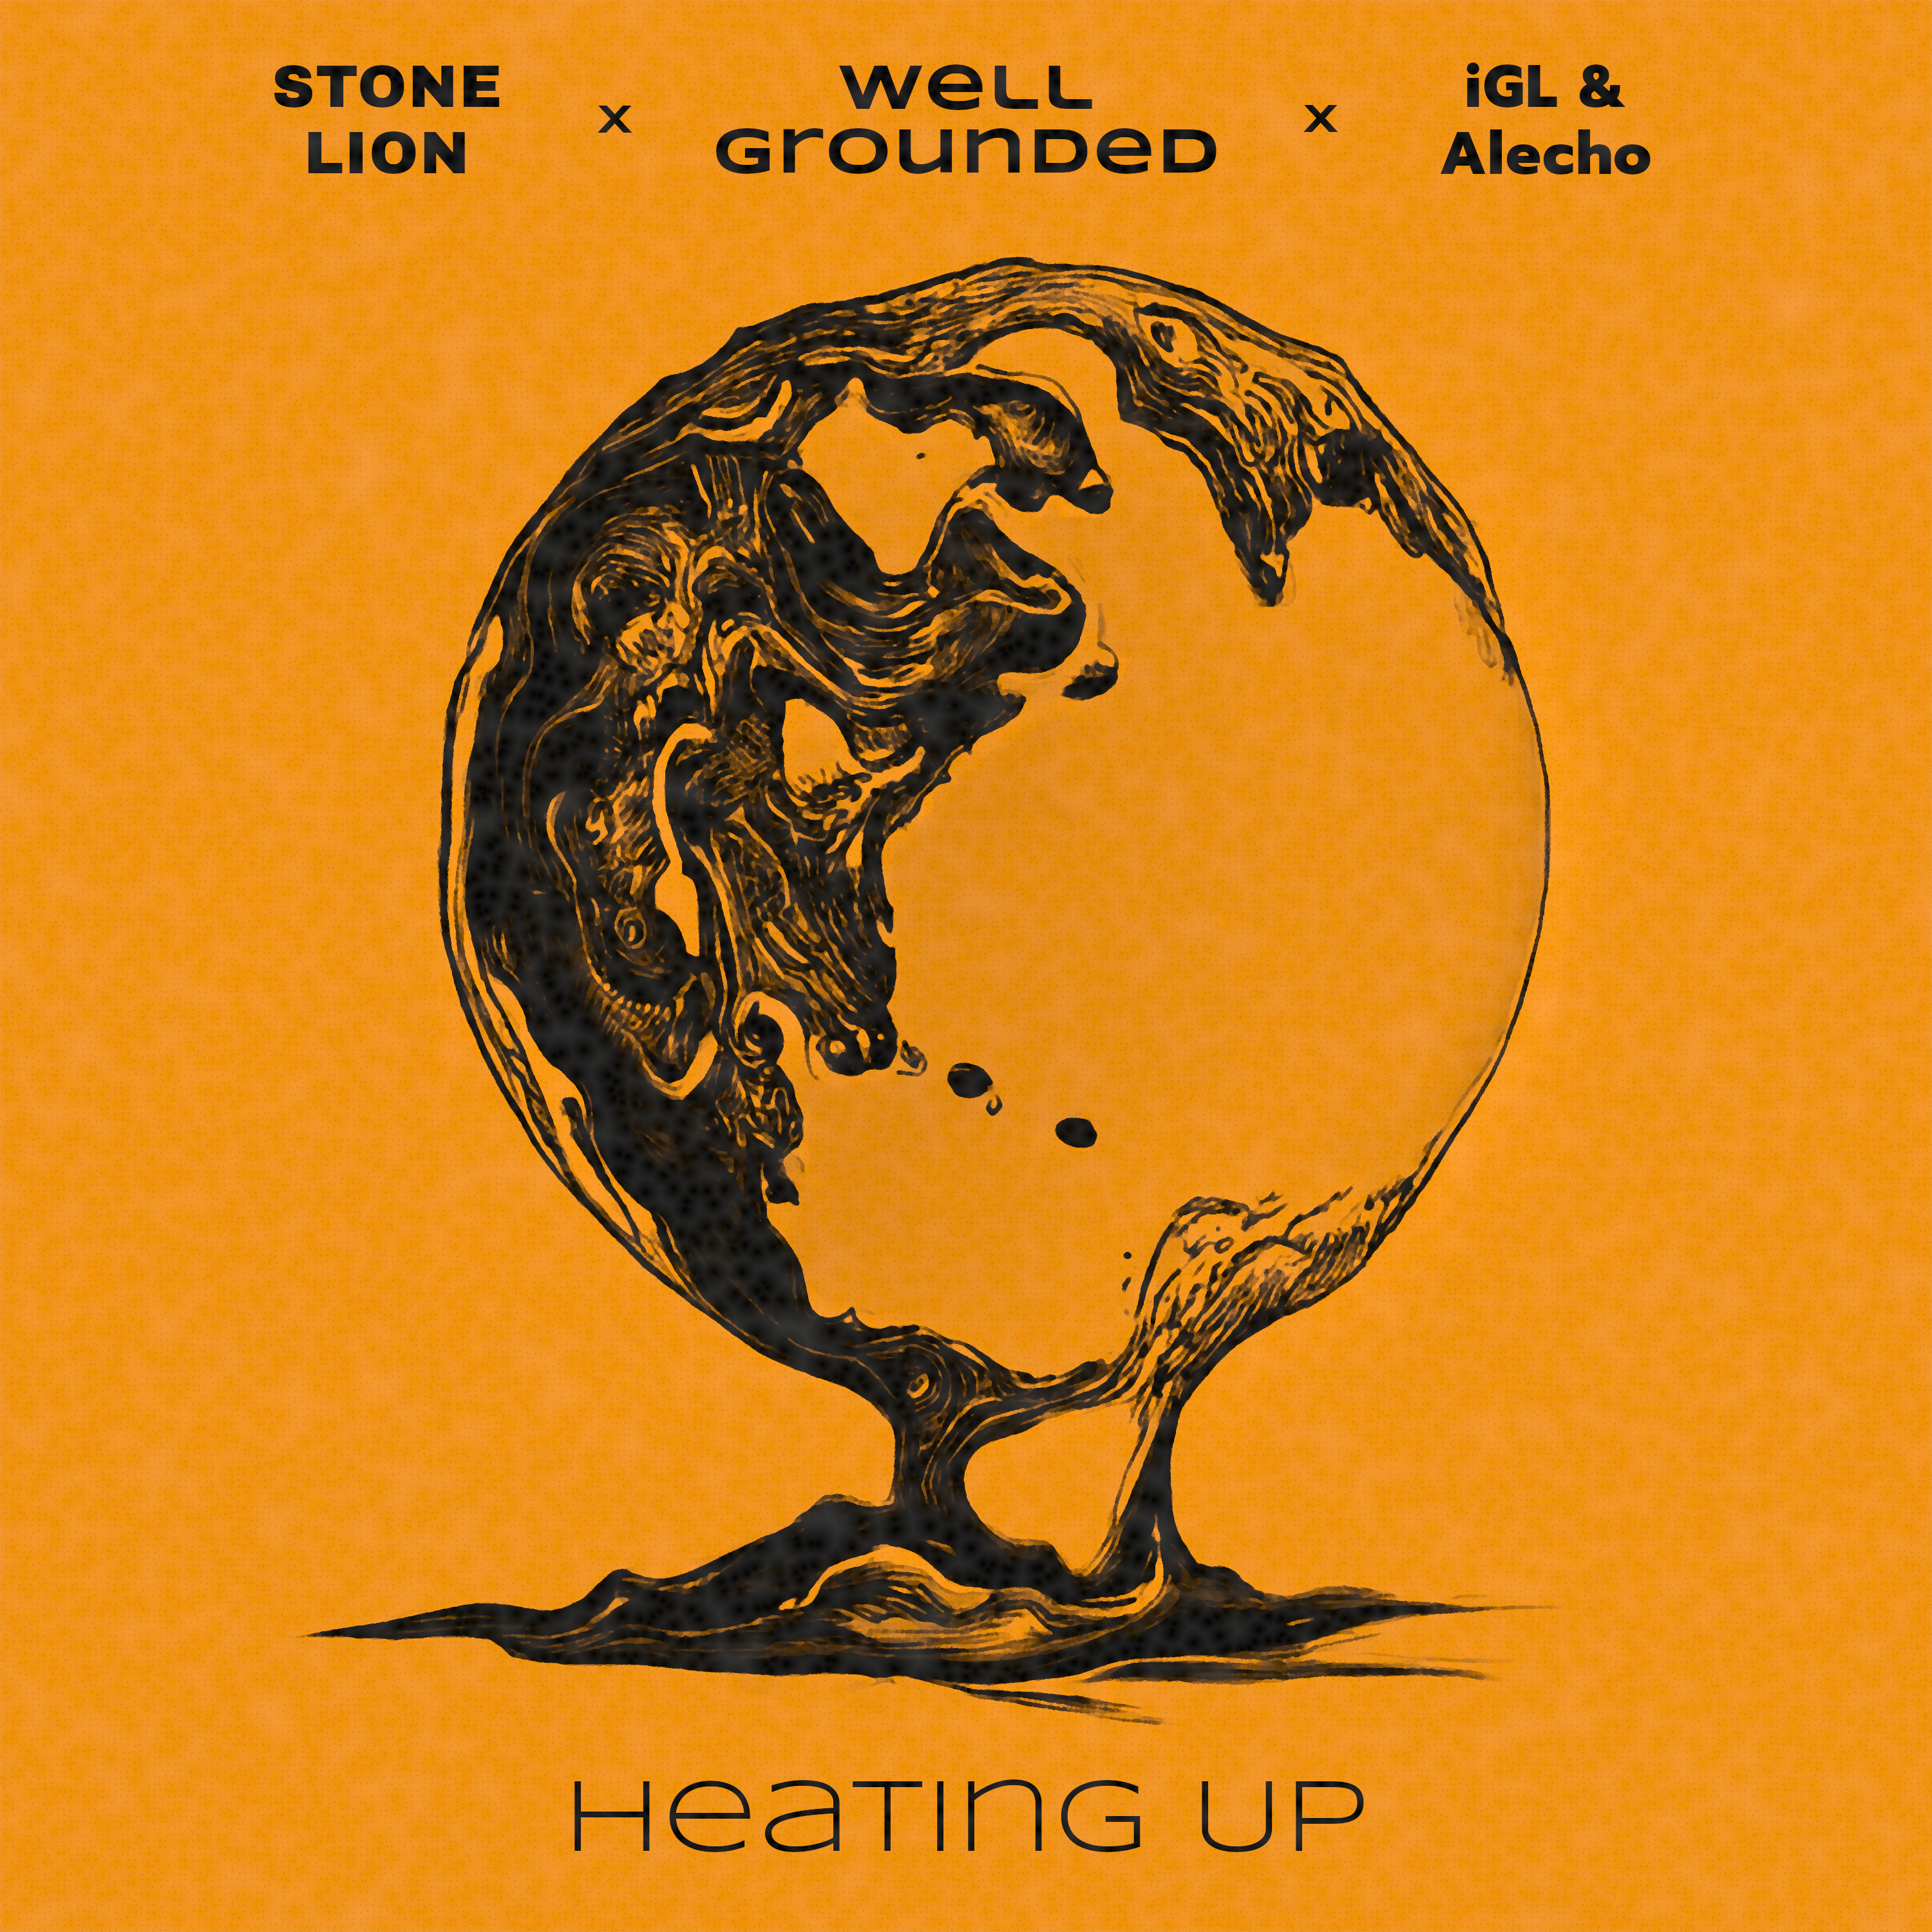 Cover art for 'Heating Up' EP by Stone Lion x Well Grounded x iGL & Alecho.